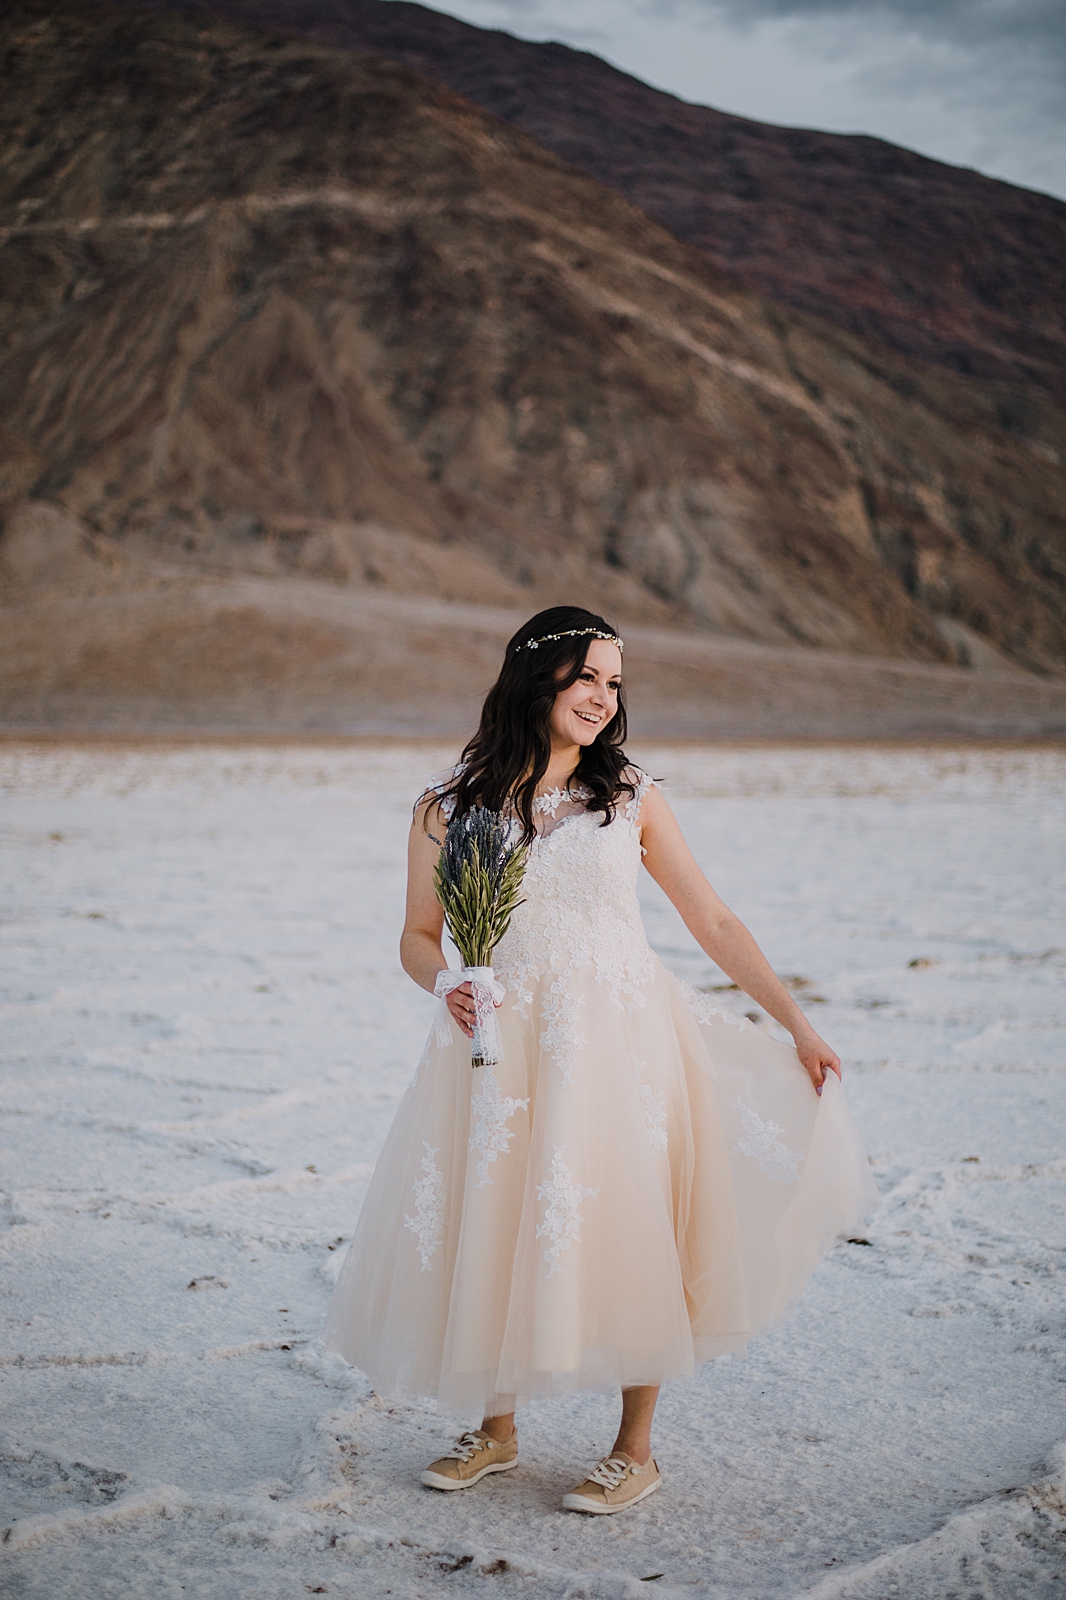 bridals at the salt flats, death valley national park elopement, elope in death valley, badwater basin elopement, hiking in death valley national park, sunset at badwater basin